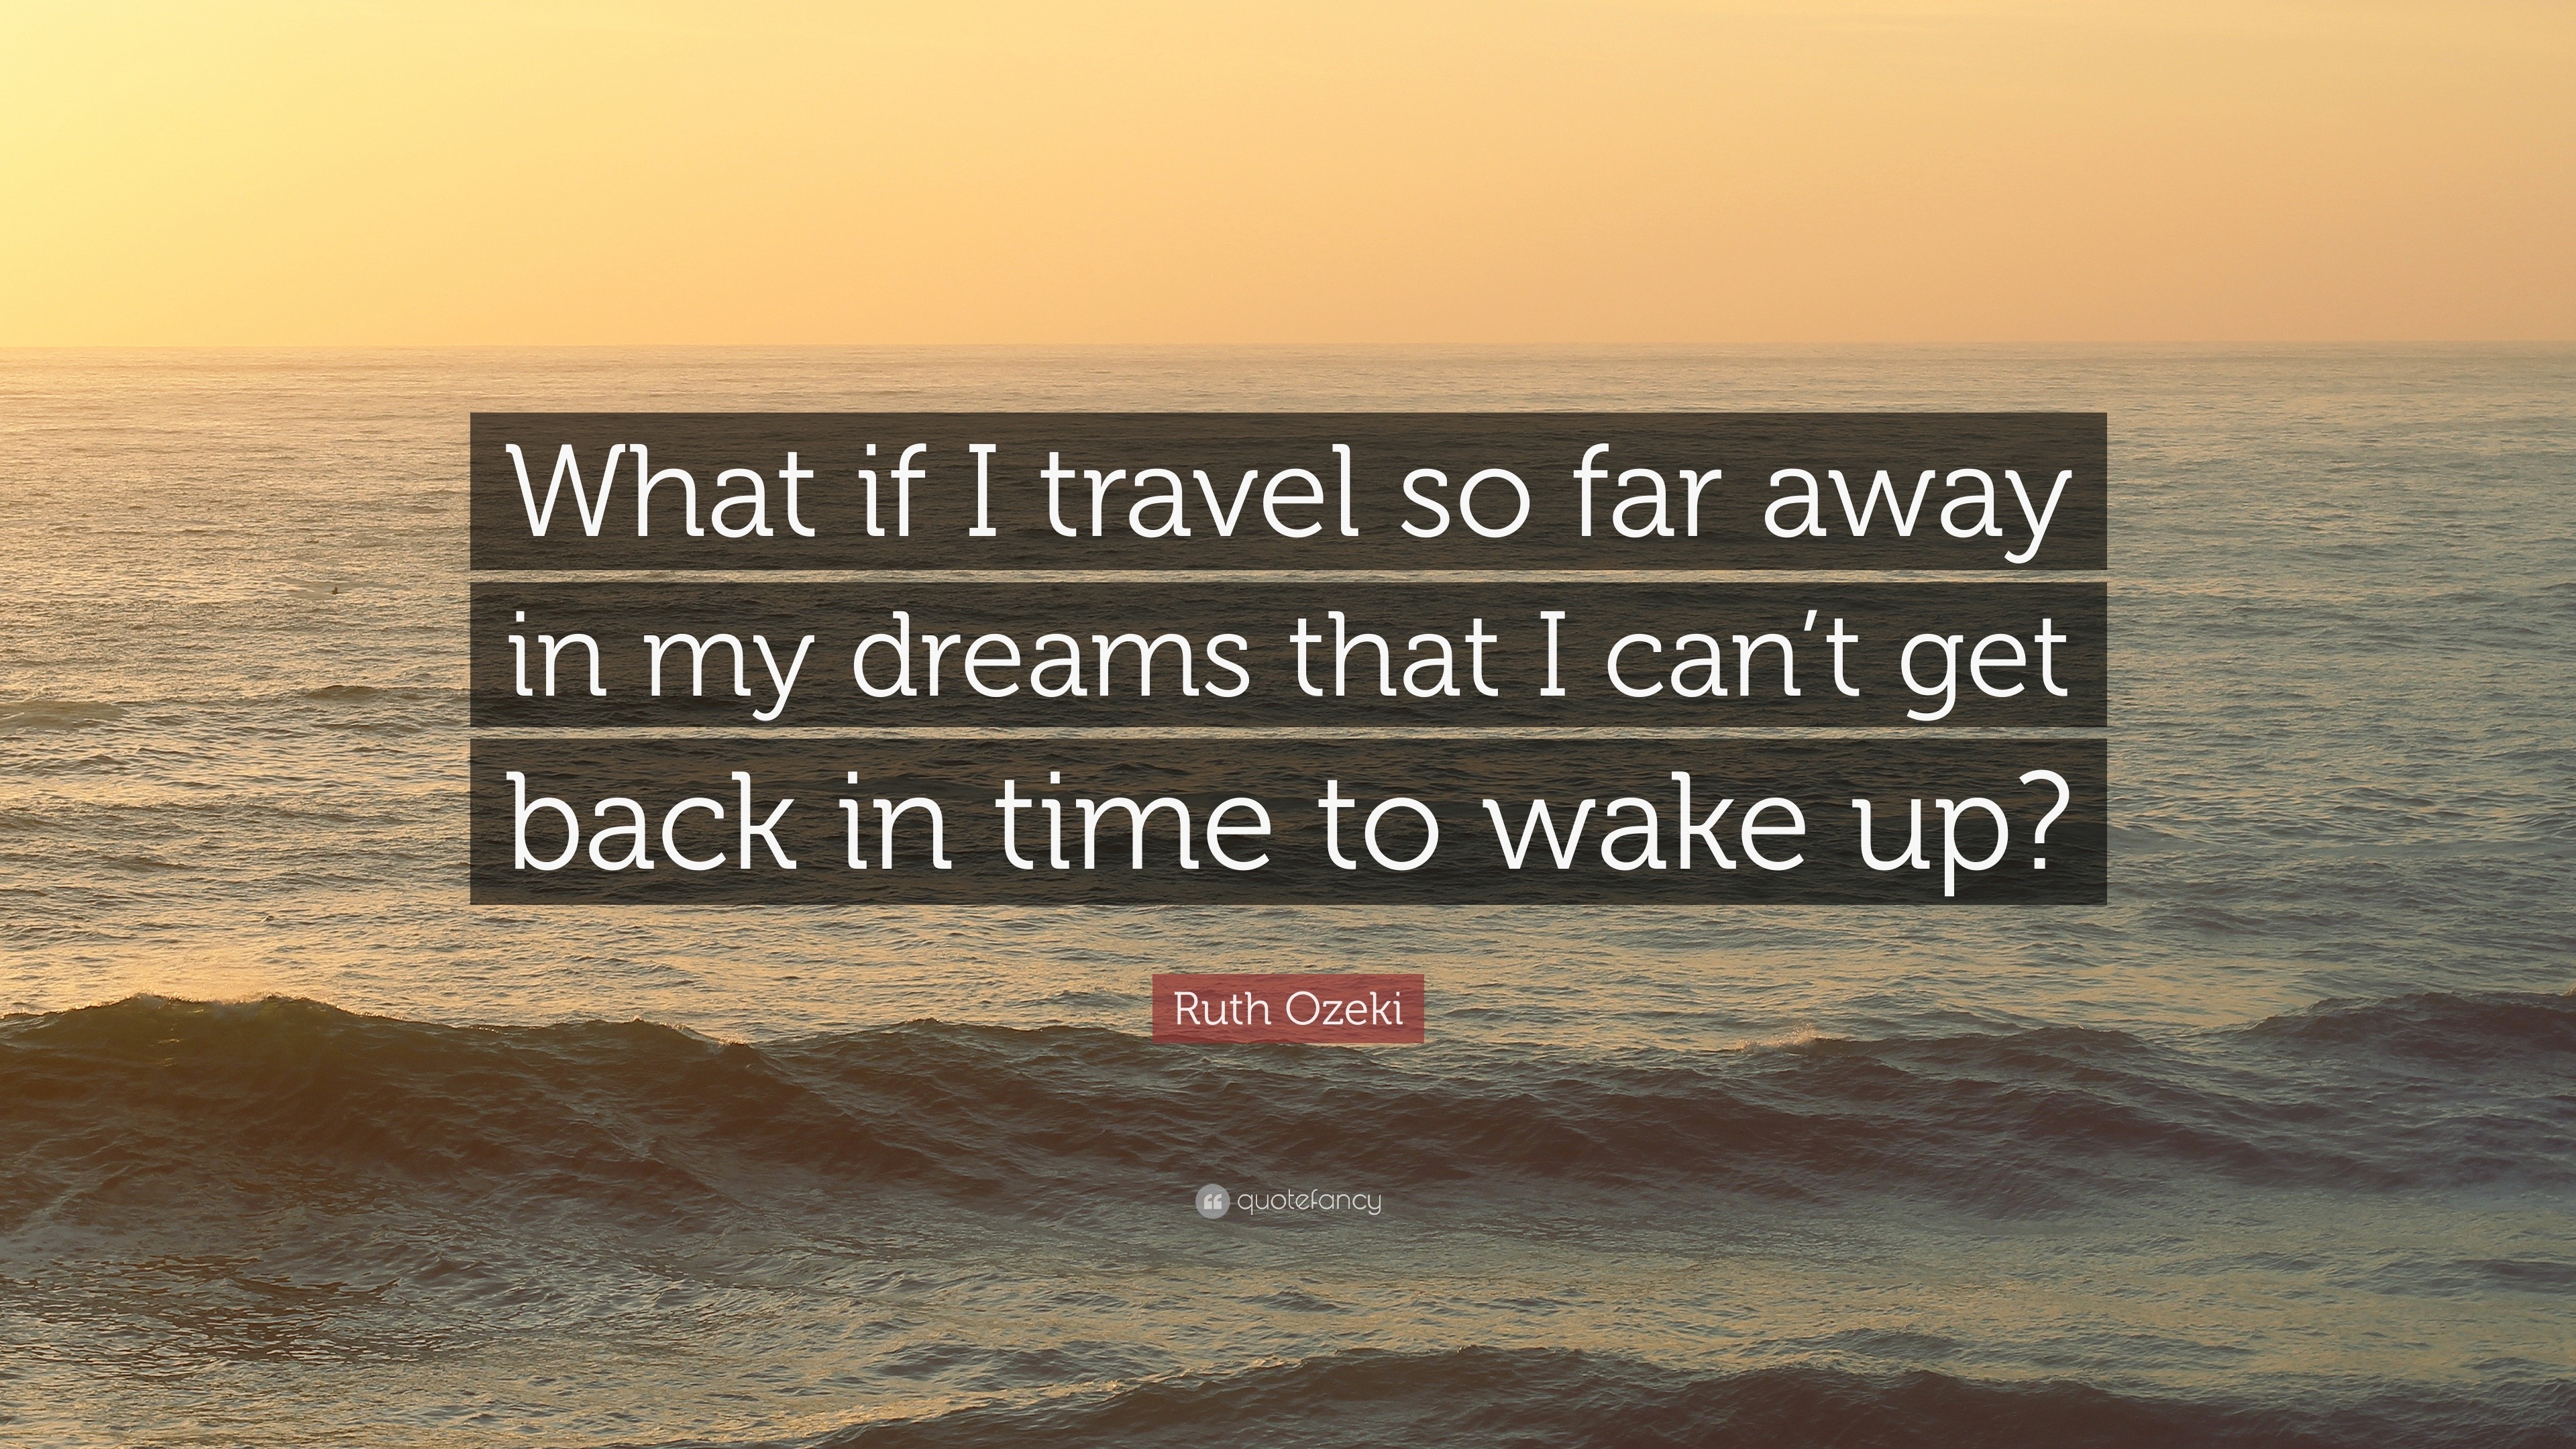 Ruth Ozeki Quote What If I Travel So Far Away In My Dreams That I Can